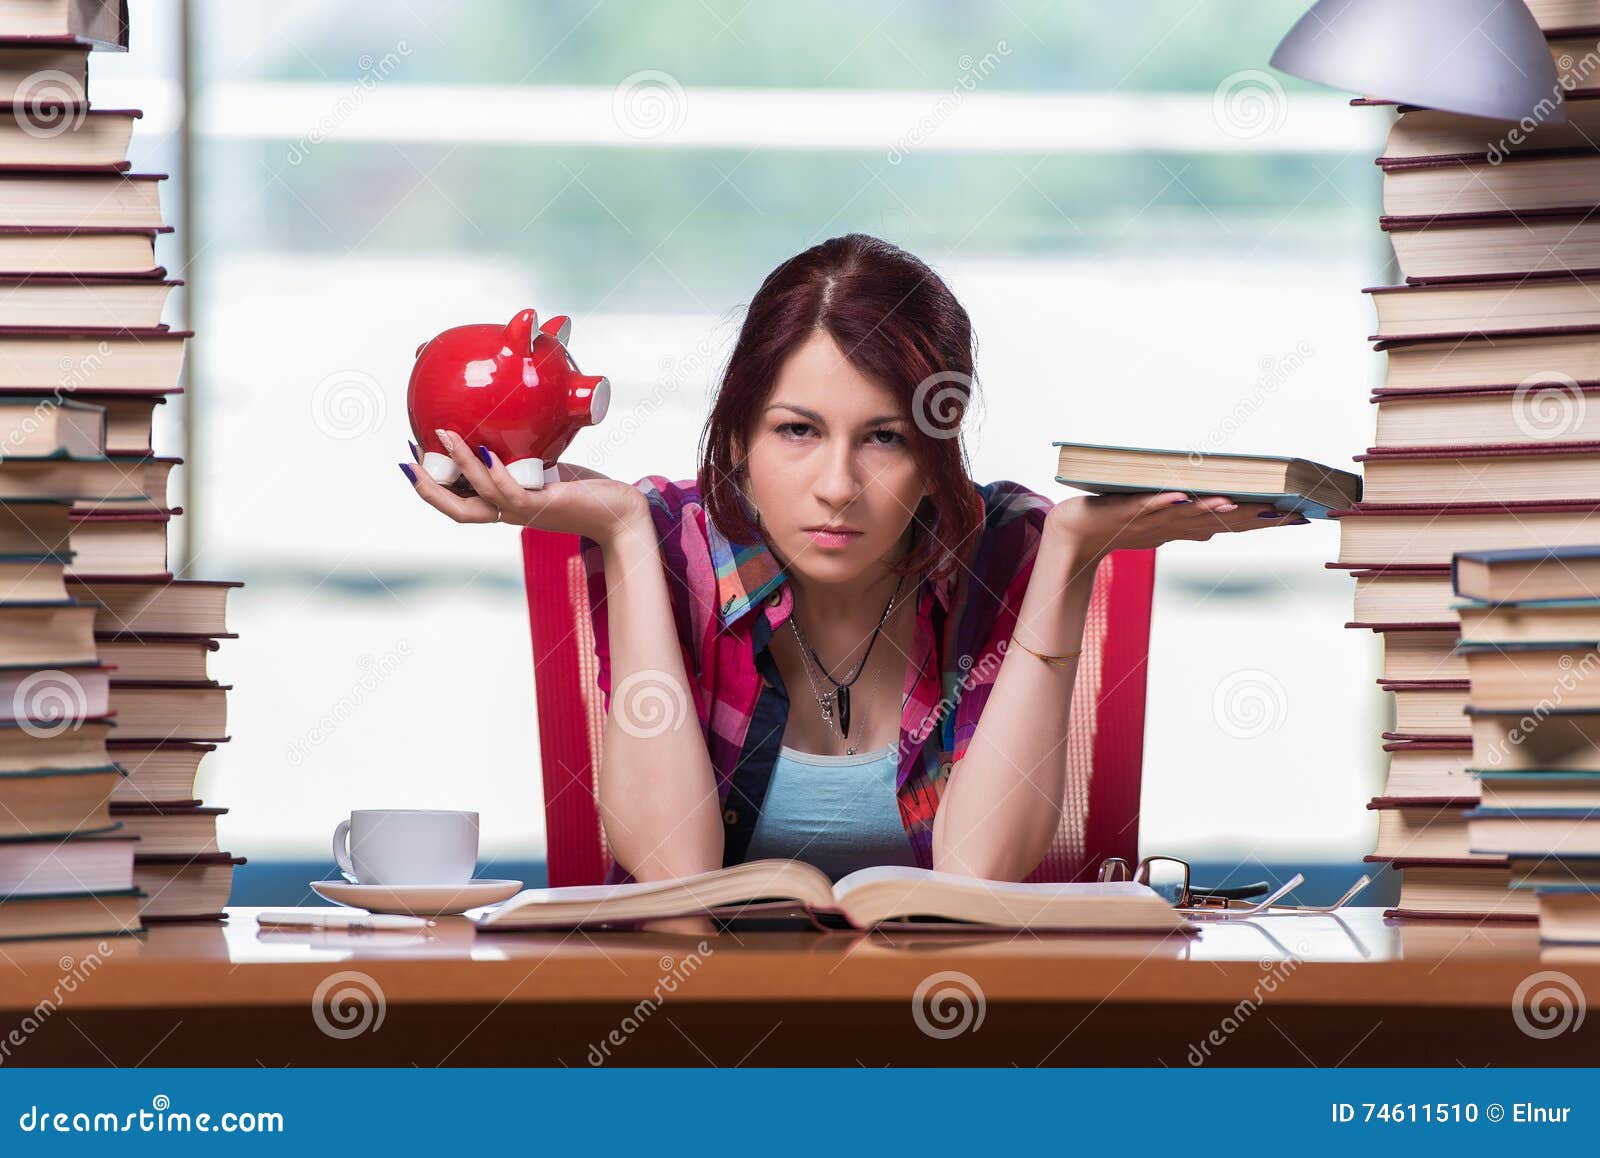 the young woman student preparing for college exams